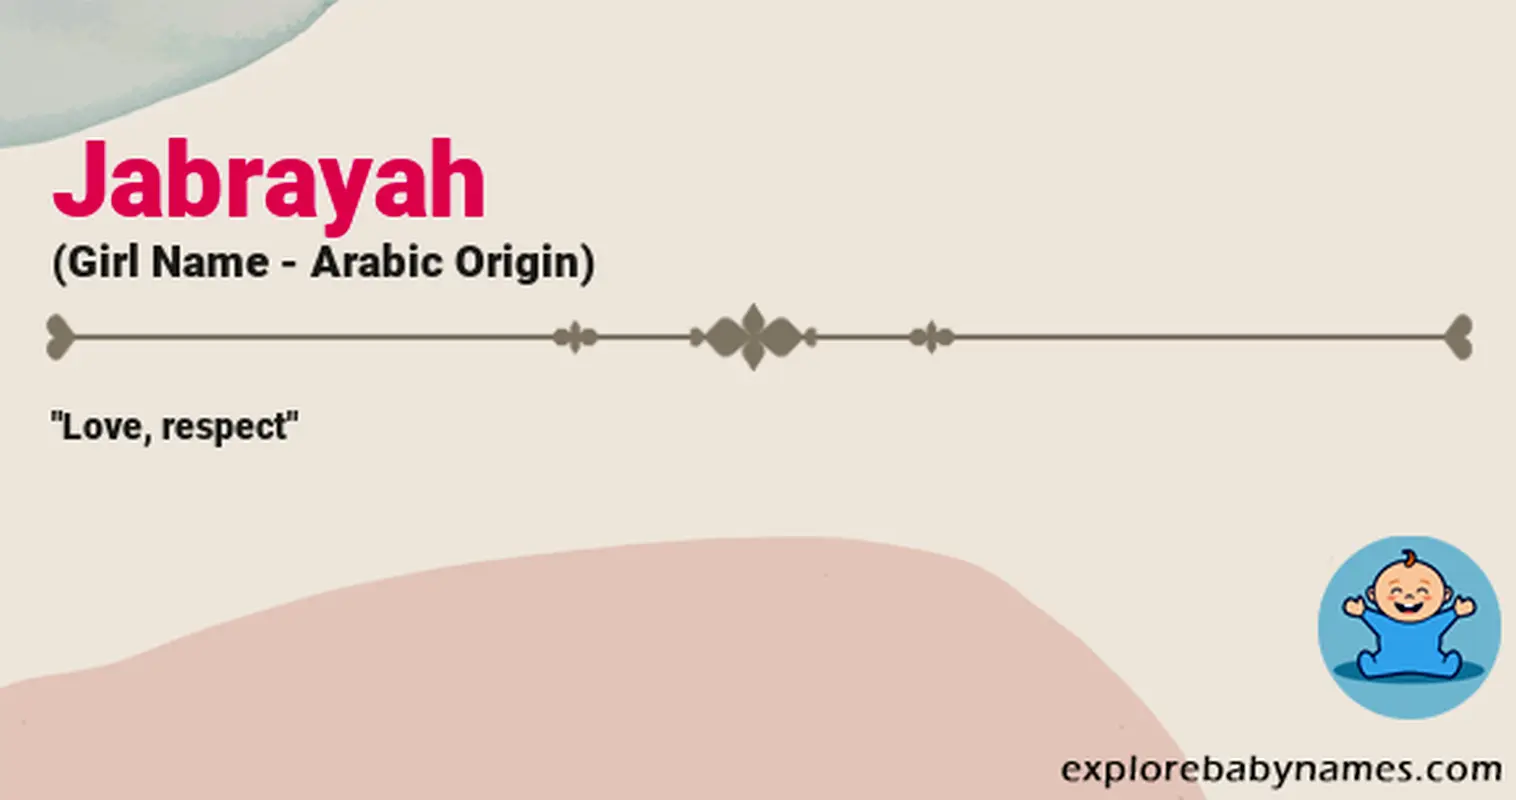 Meaning of Jabrayah